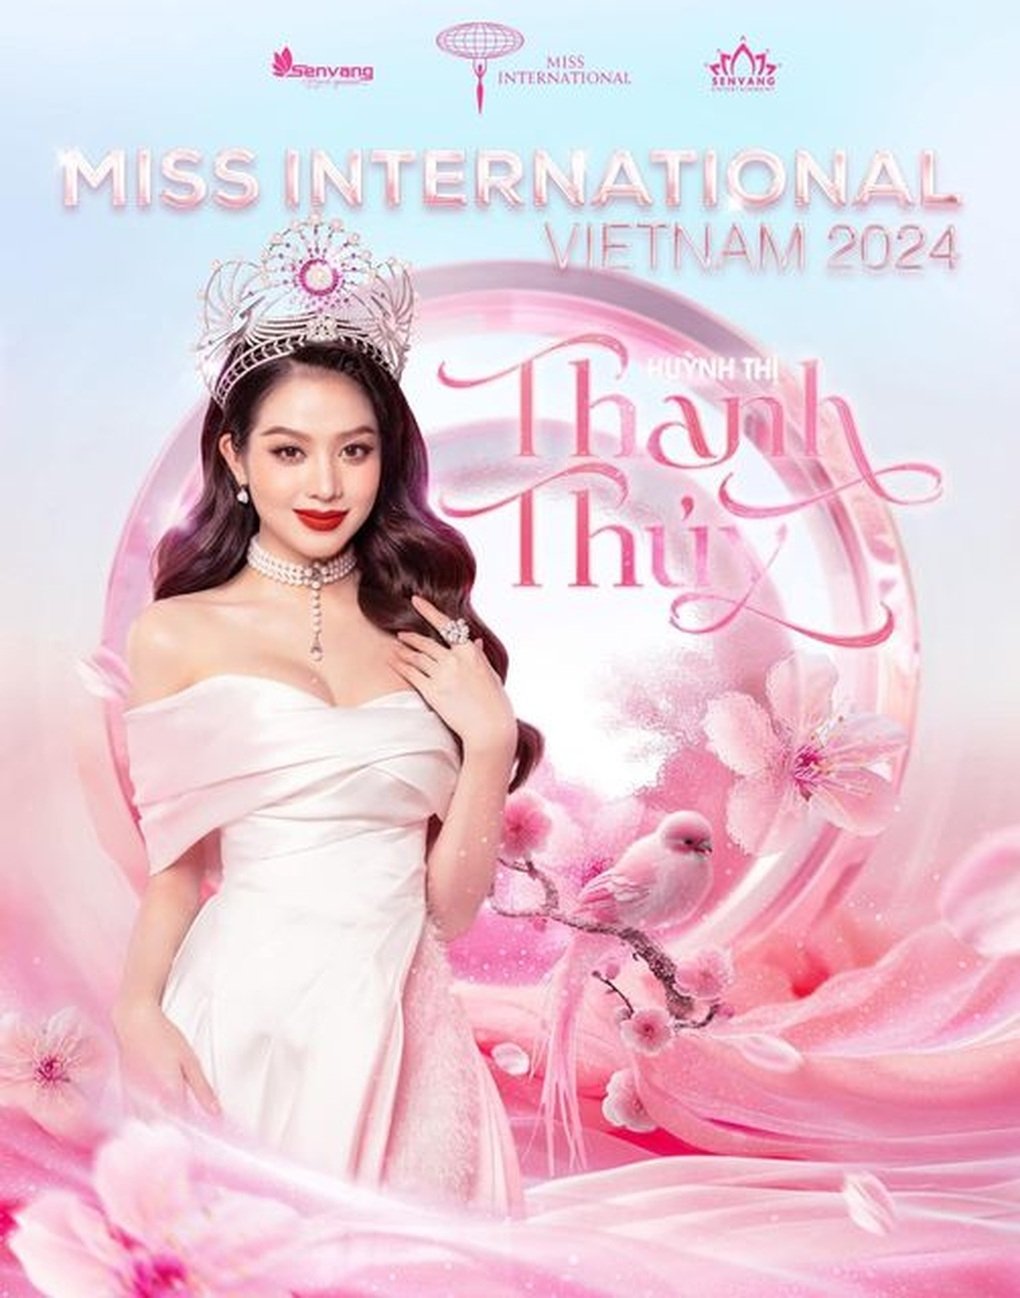 The image of Miss Thanh Thuy on the Miss International homepage attracted attention 1